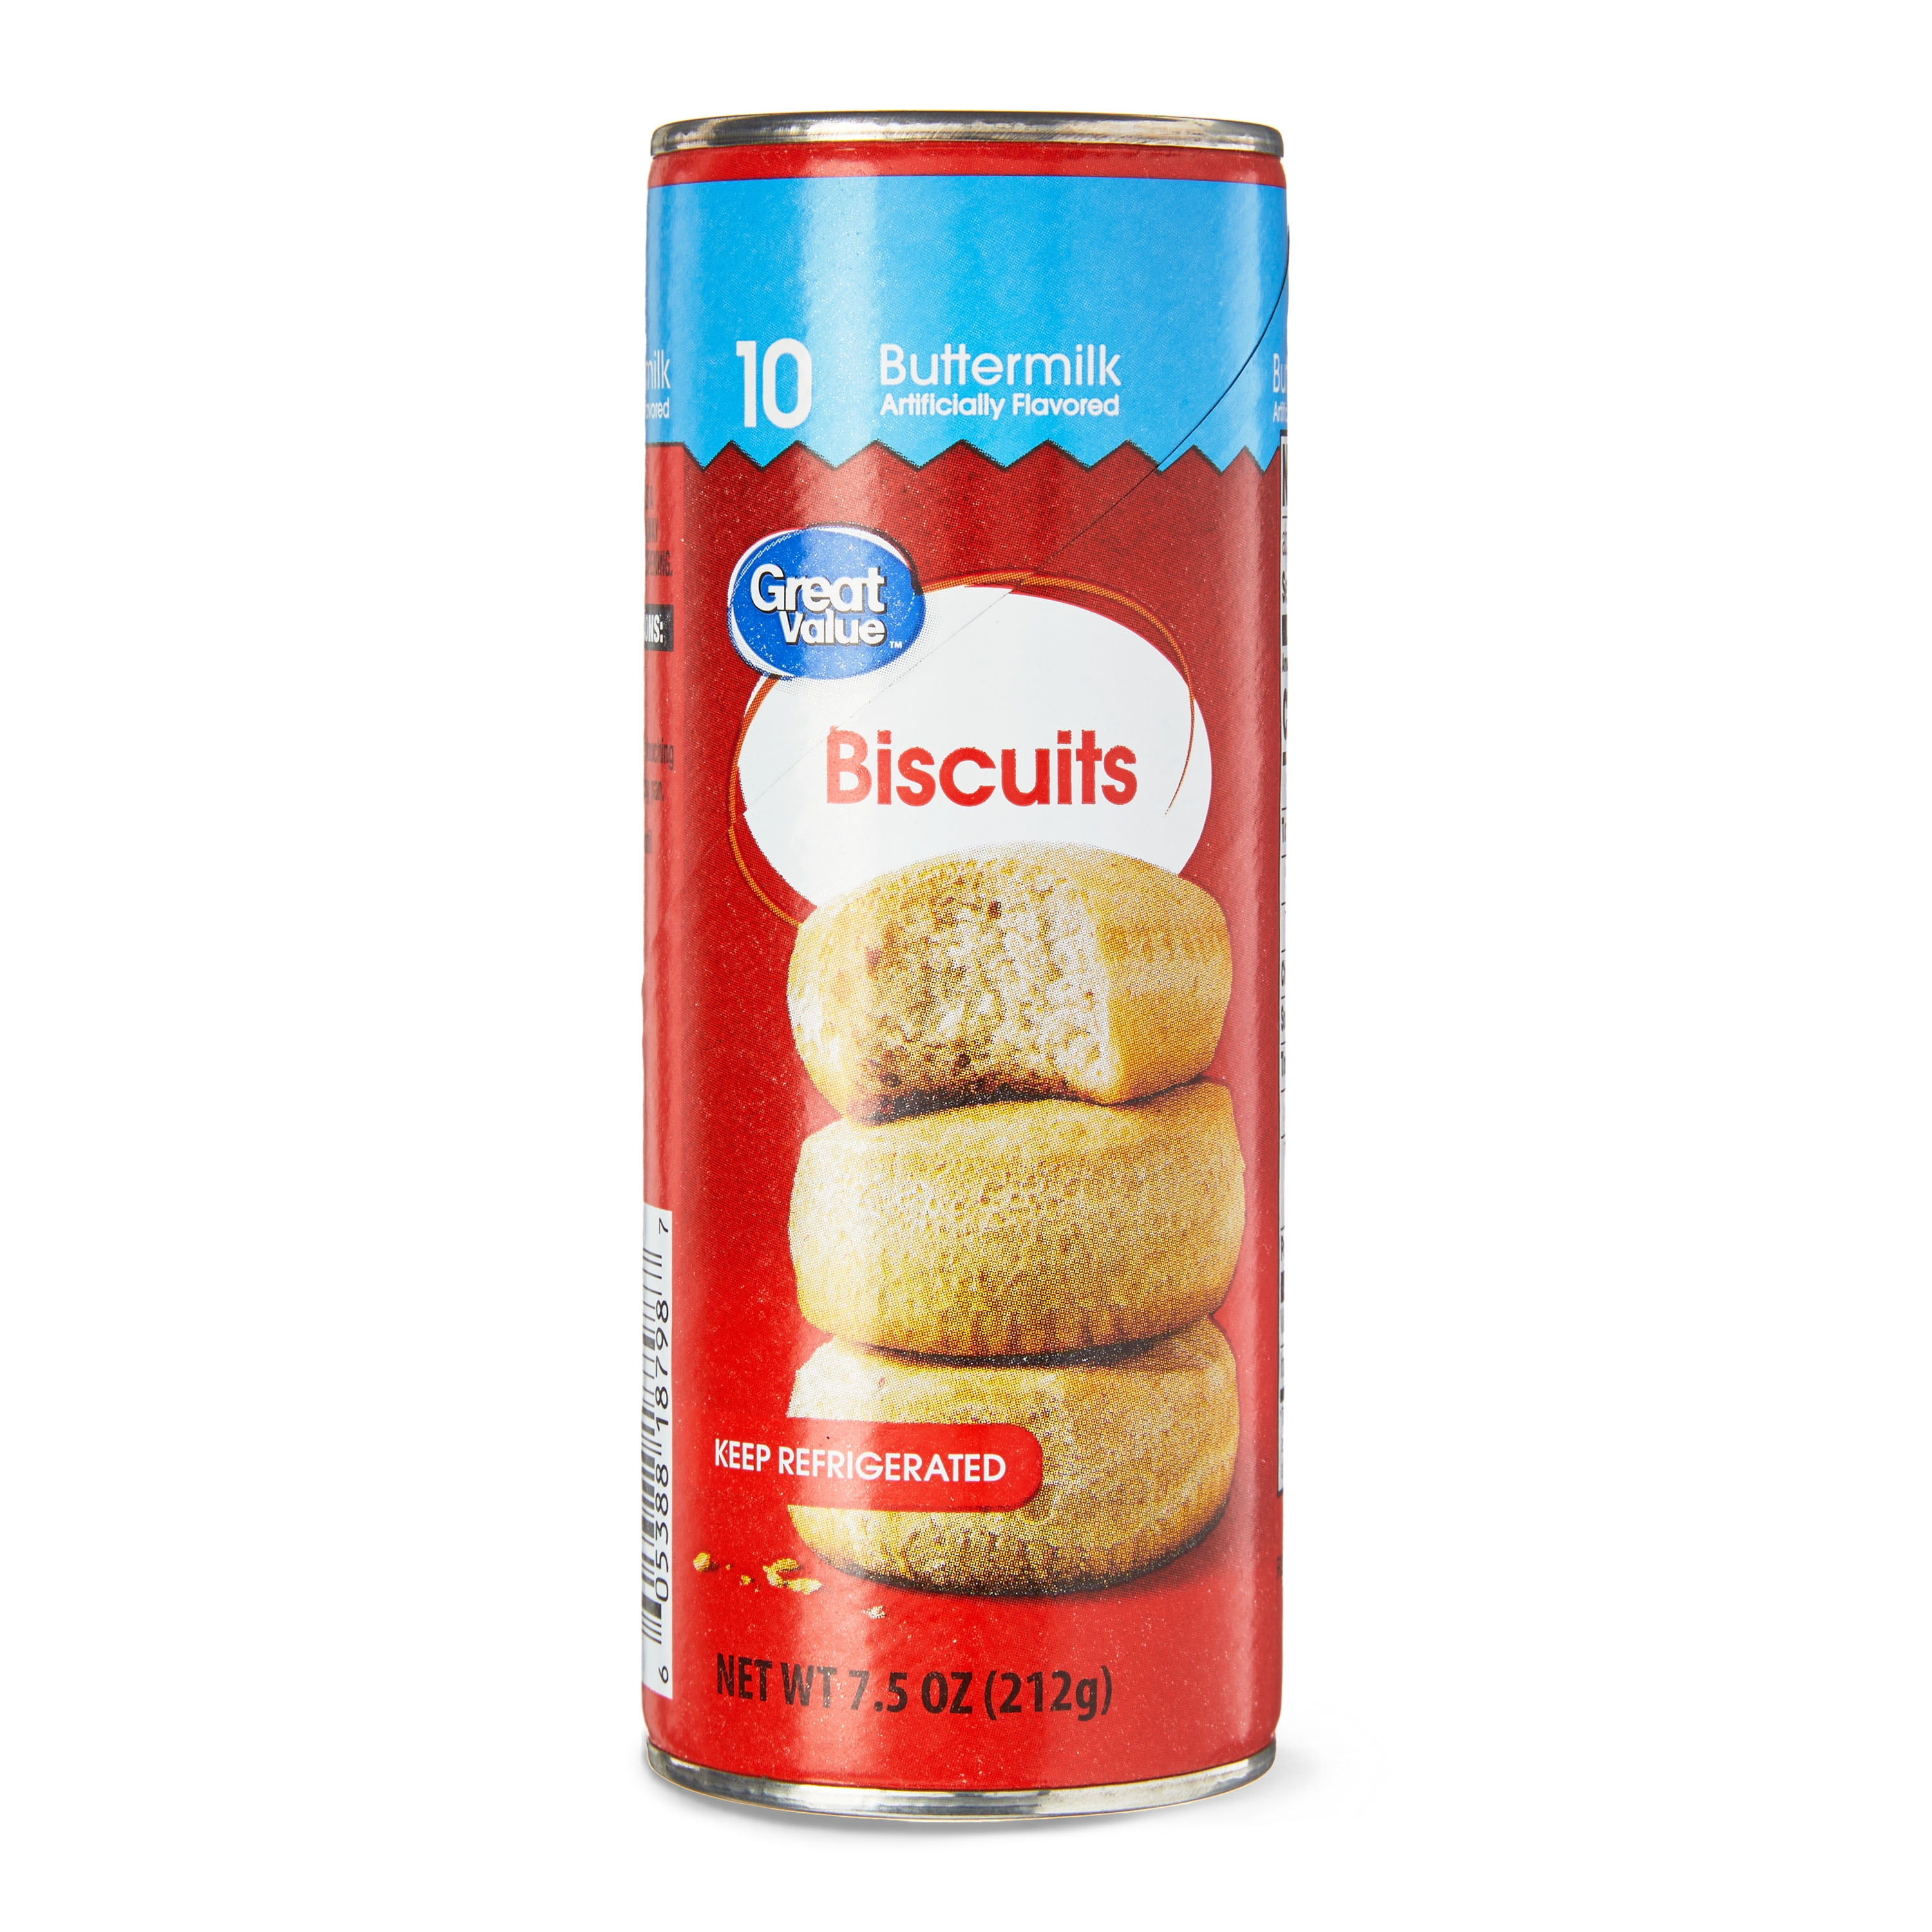 Great Value Buttermilk Biscuits, 10 Count, 4 Pack